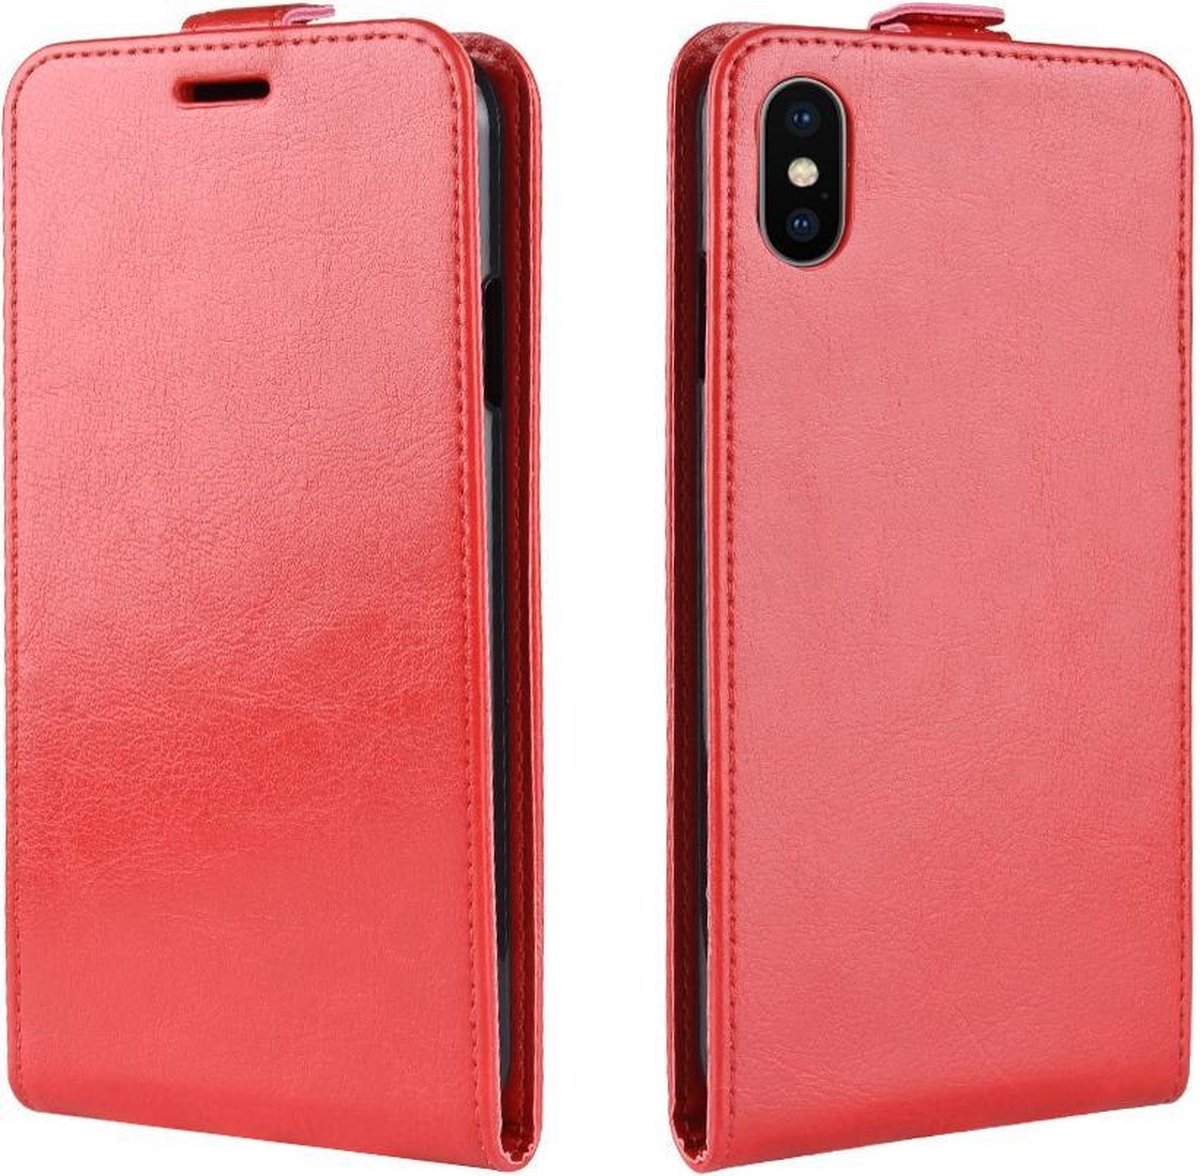 Flip case - Iphone XR Hoesje - Rood - Crazy Horse